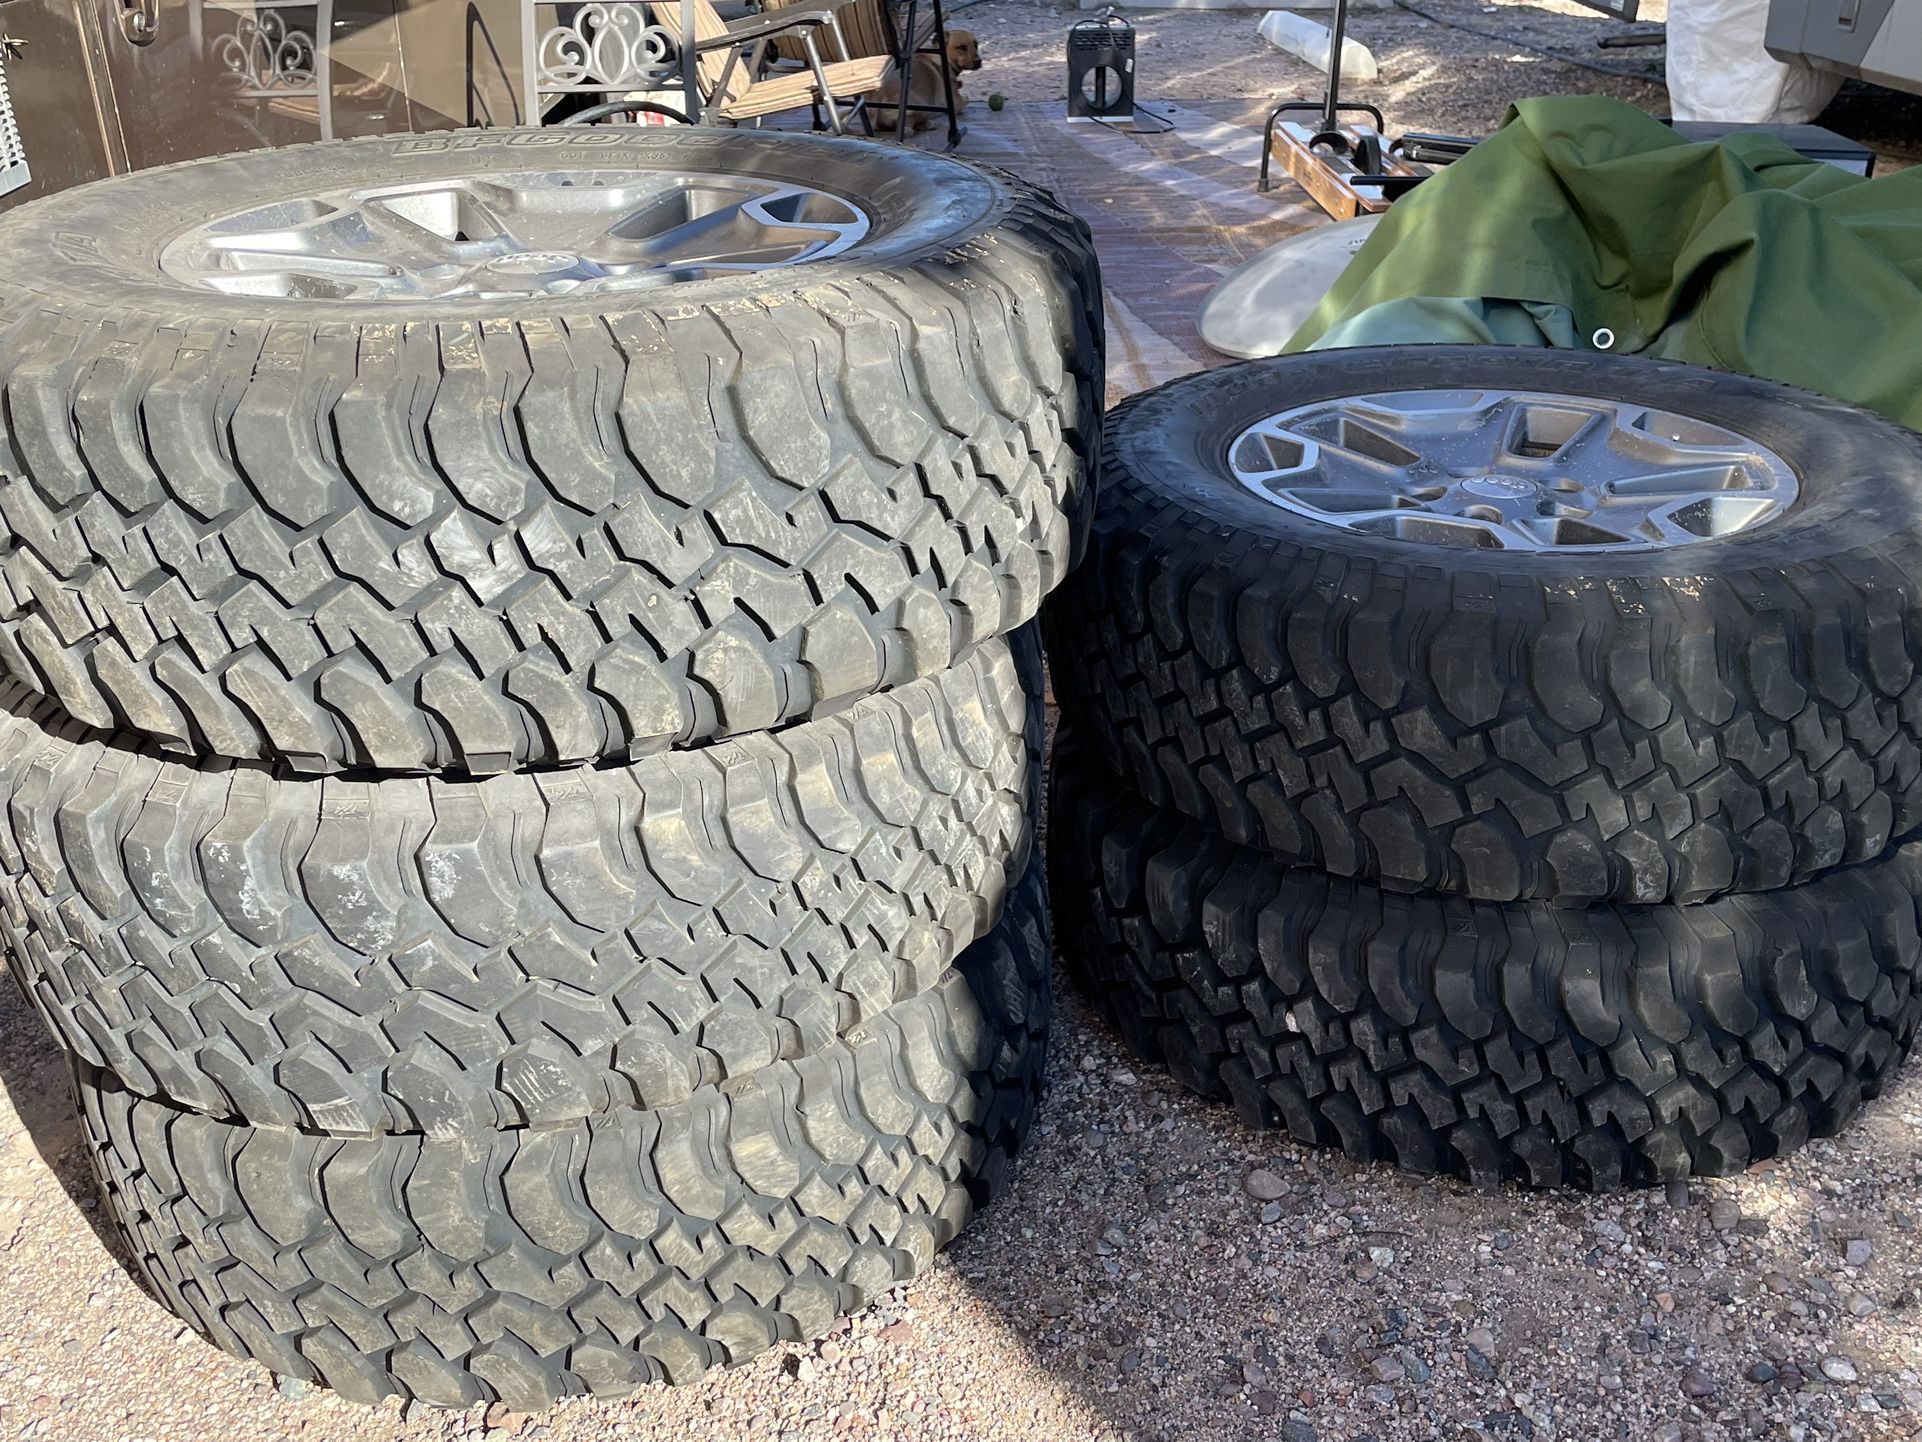 5-BF Goodrich Tires With Jeep Rubicon Rims And Lugnuts